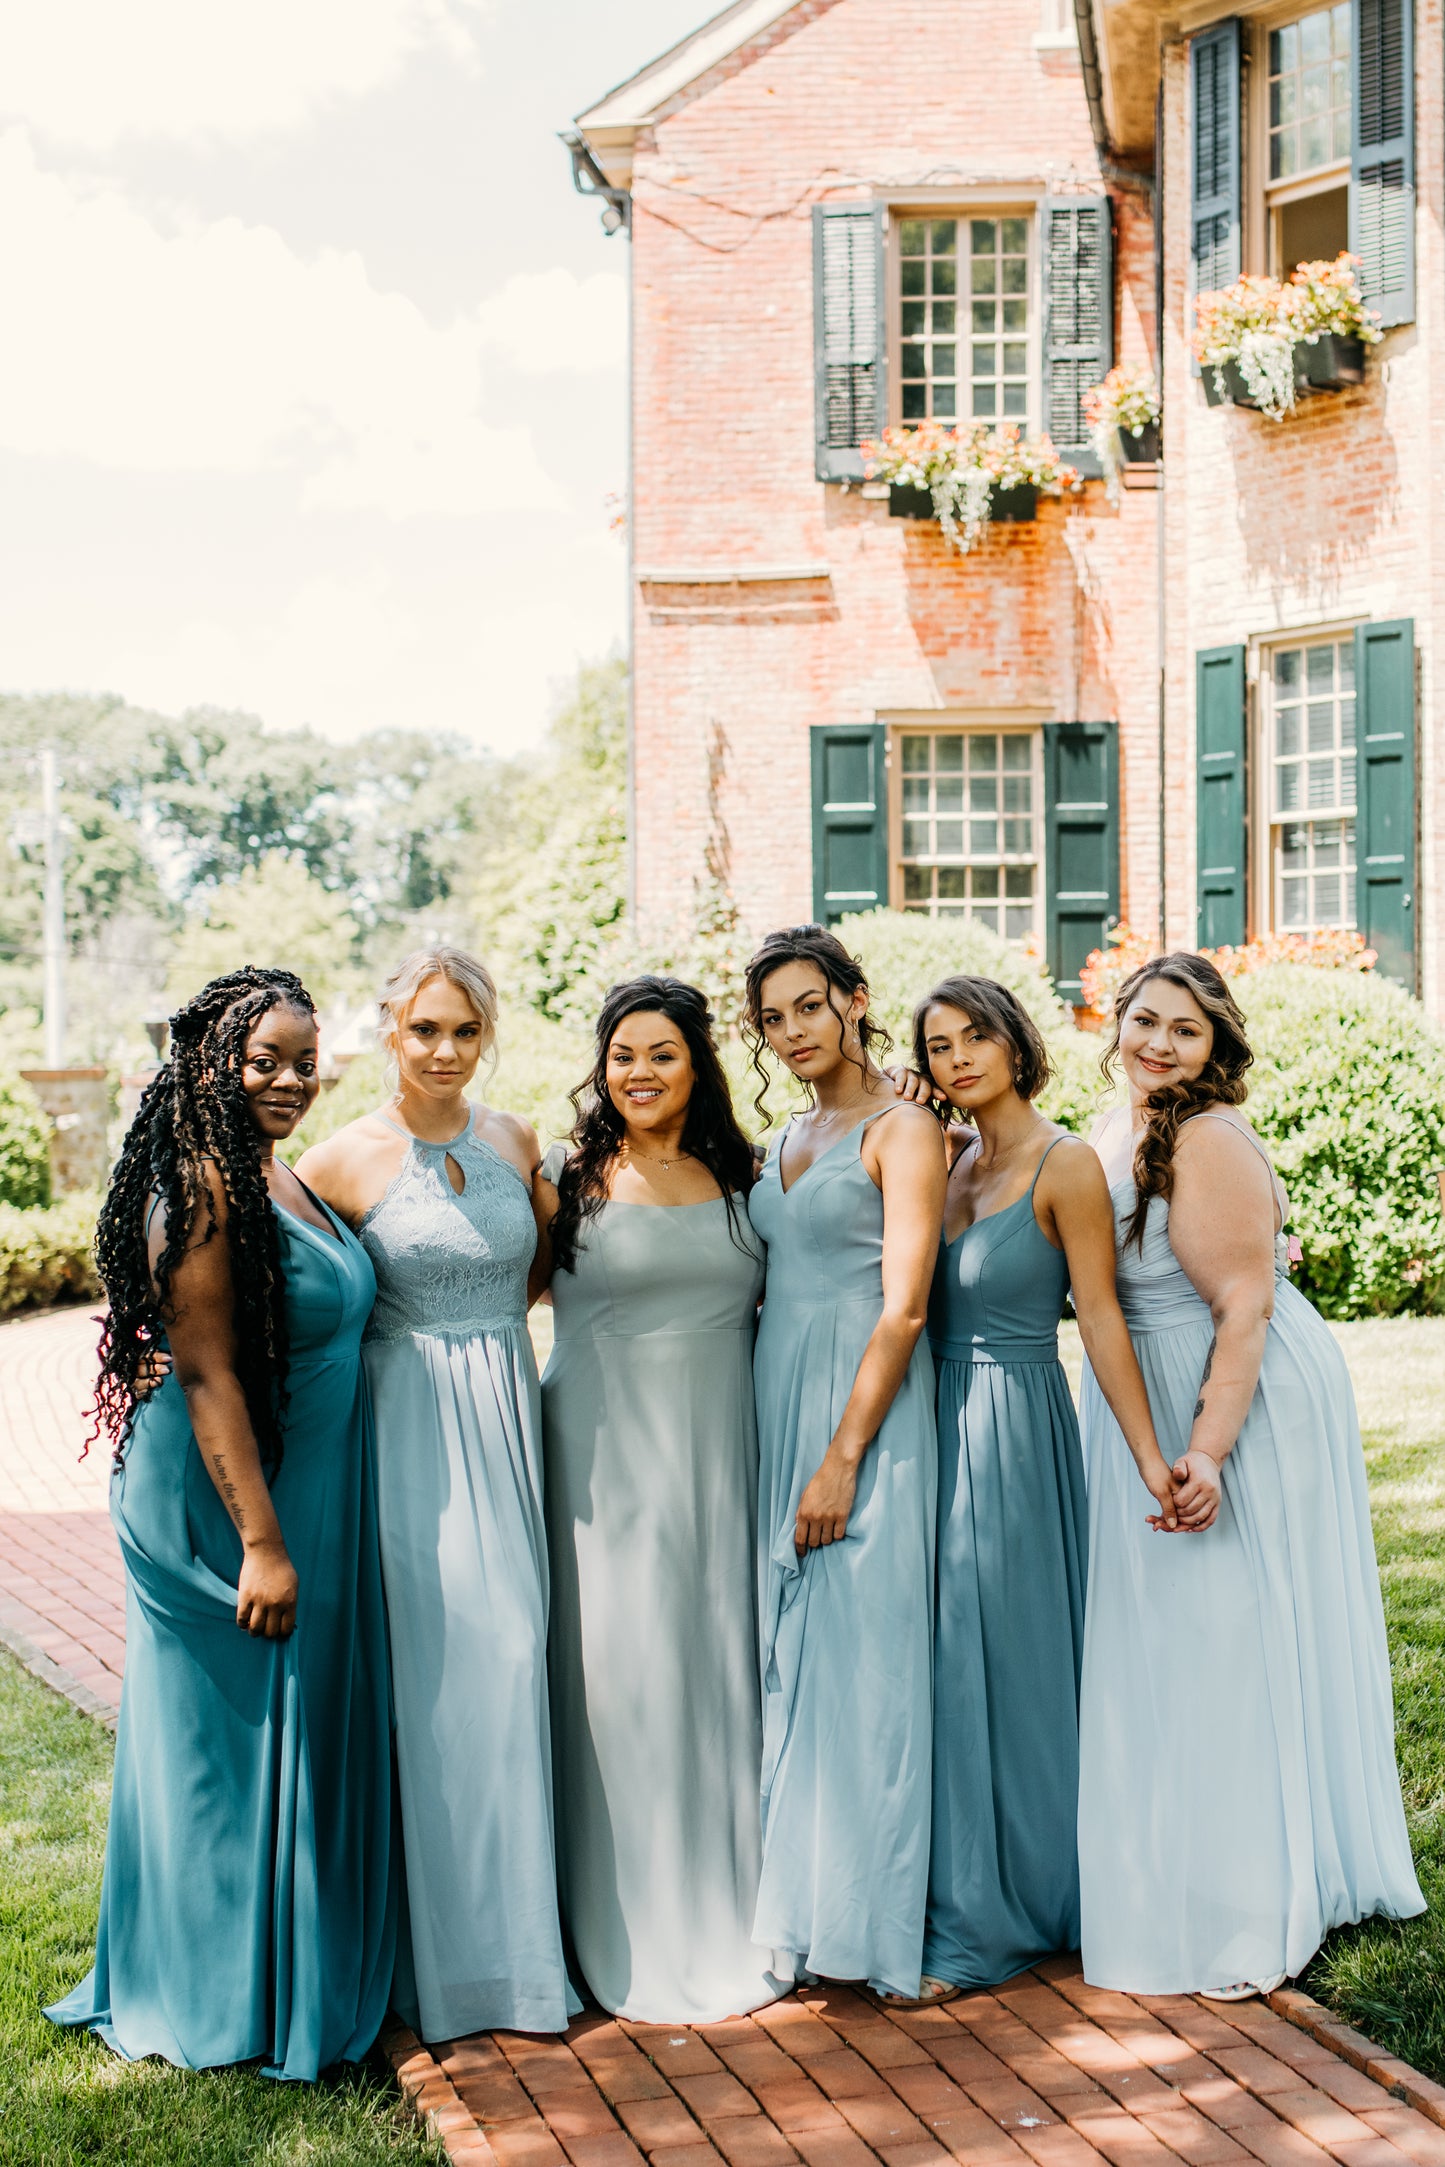 Erin (second from left) wears the Lila Dress